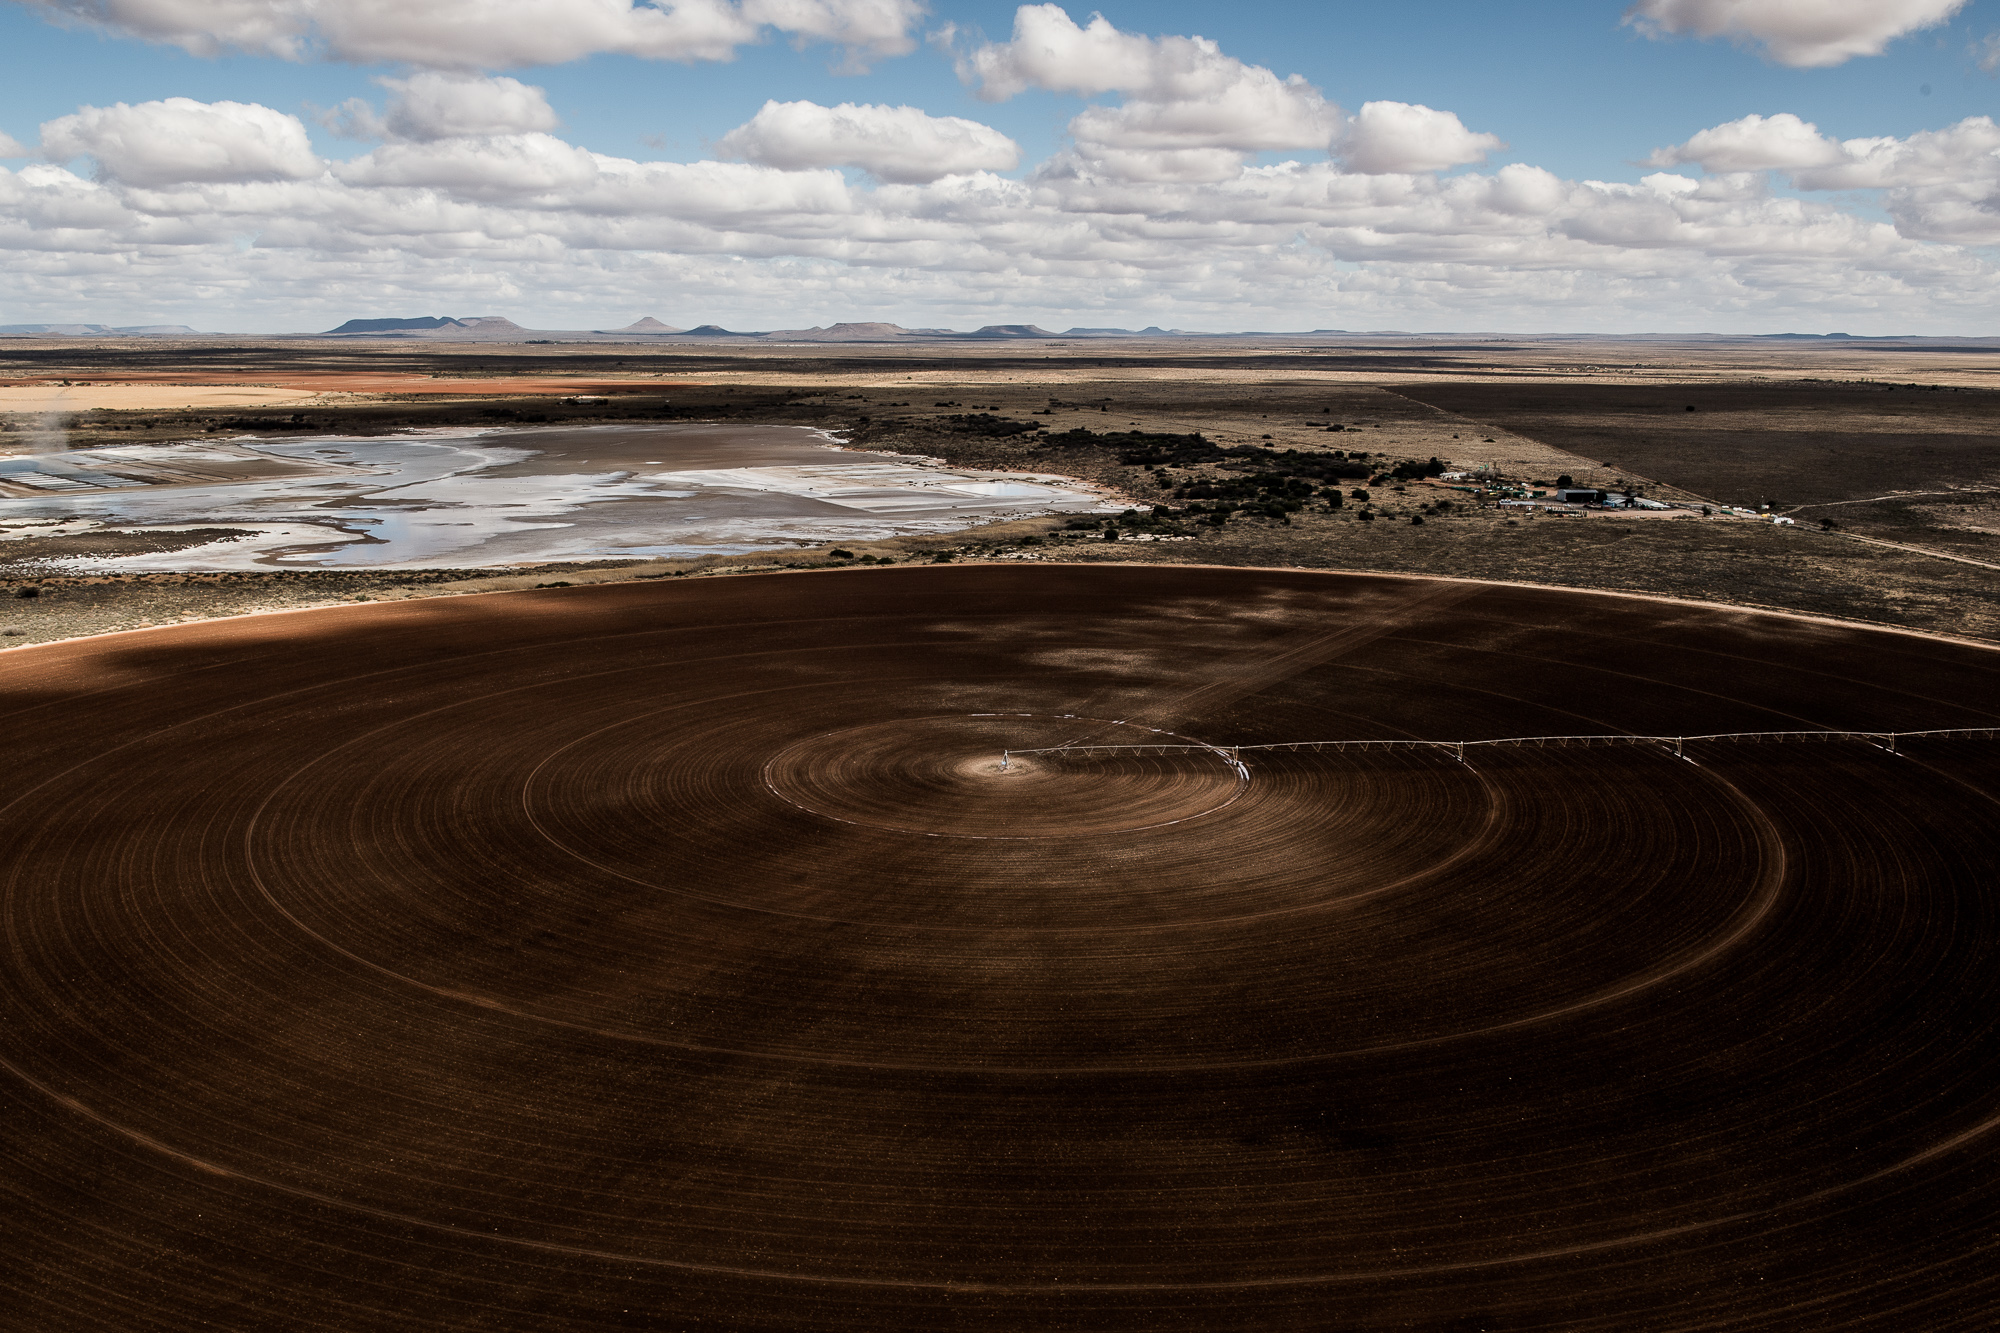  South Africa, Northern Cape, 05.08.2018 // To farm in the Karoo Desert the fields need to be irrigated. Willem, a farmer, is using water from the Oranje River. In a circle pivots are irrigating the fields. The climate allows for two harvests a year.